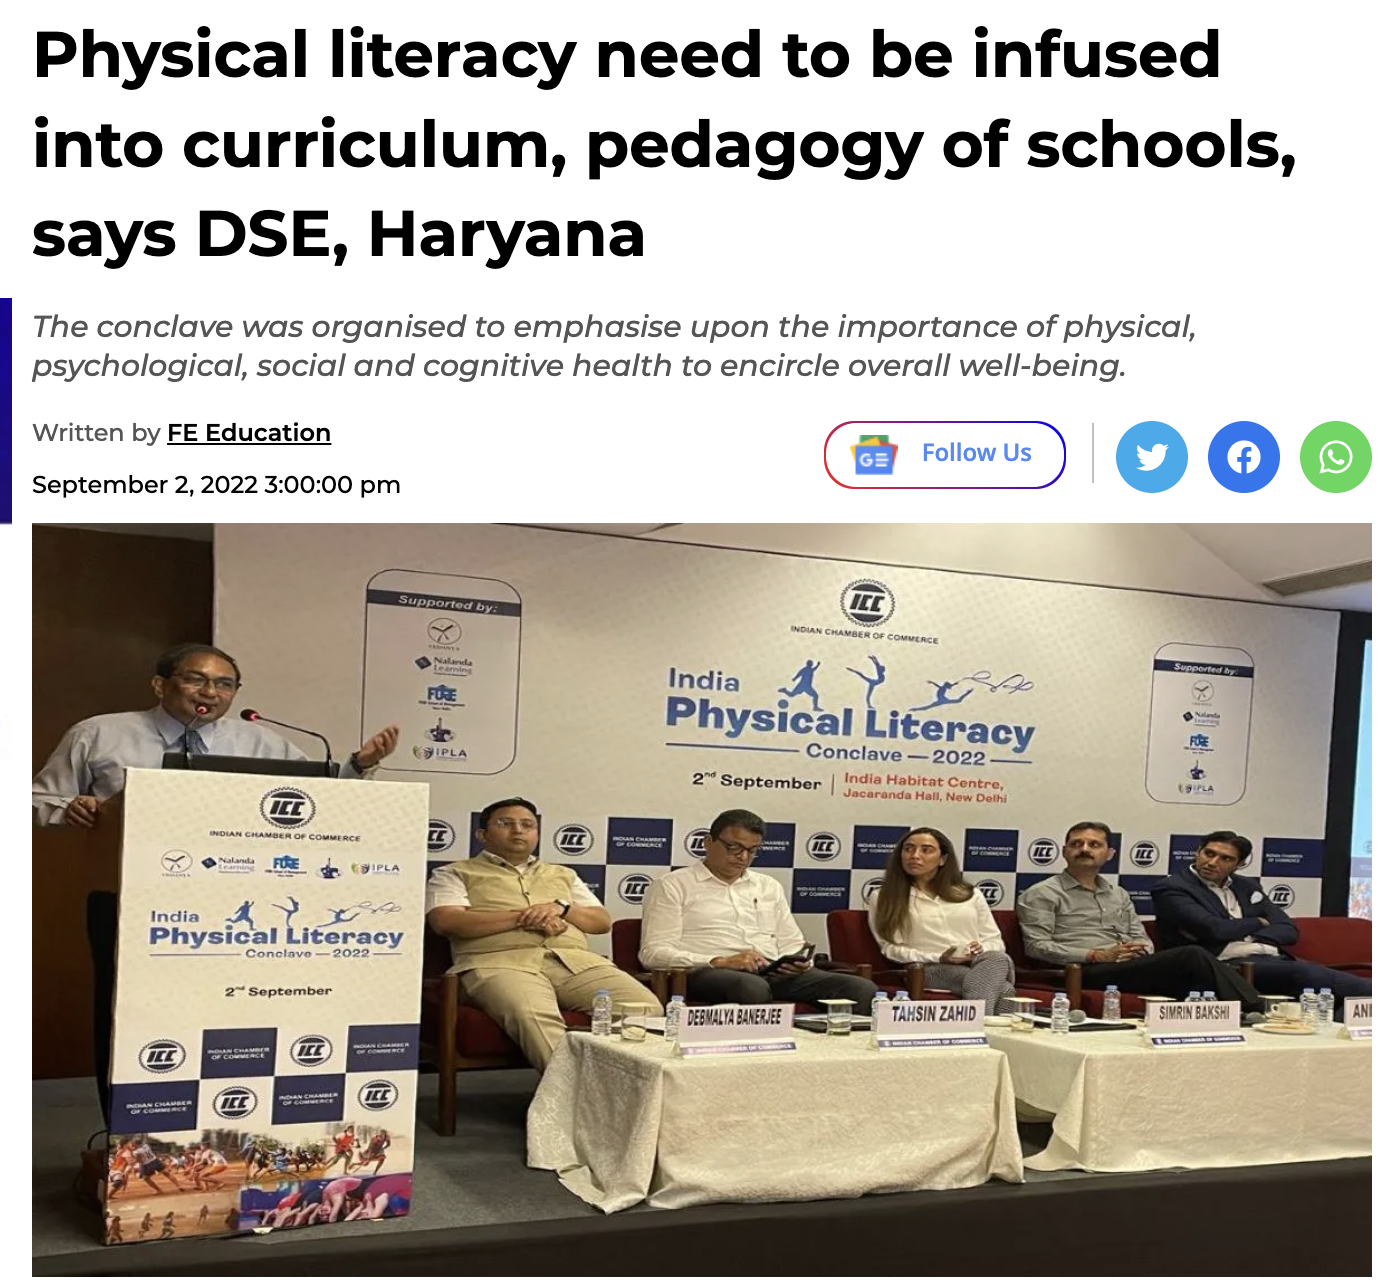 Physical literacy need to be infused into curriculum, pedagogy of schools, says DSE, Haryana